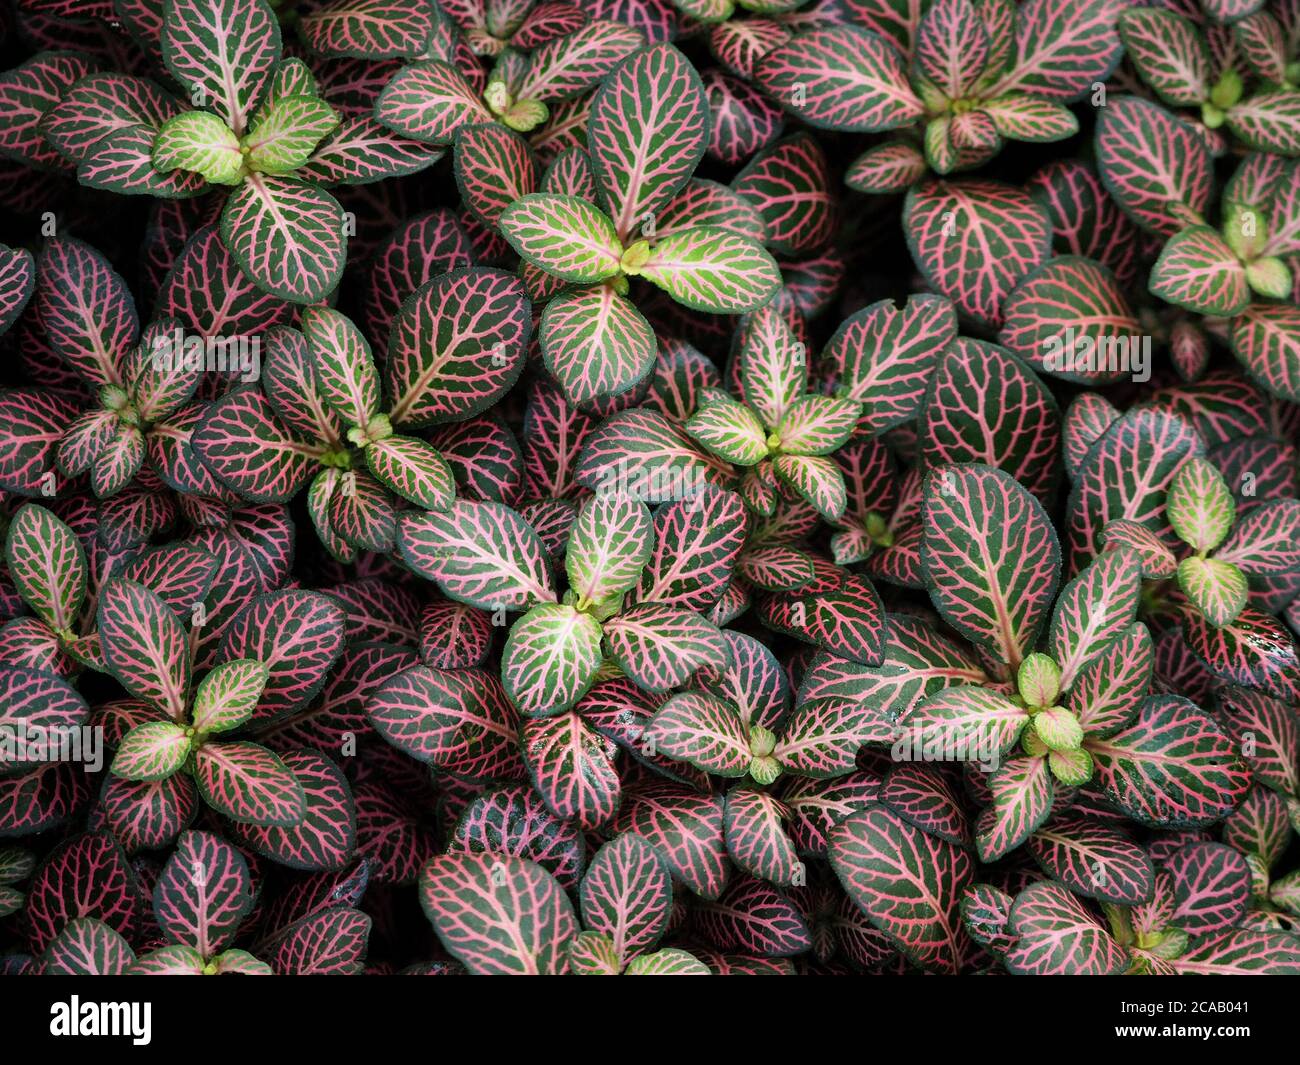 massed carpet of exotic Fittonia foliage plant with intricate pink veining on purple and green leaves of various shades create intricate pattern Stock Photo